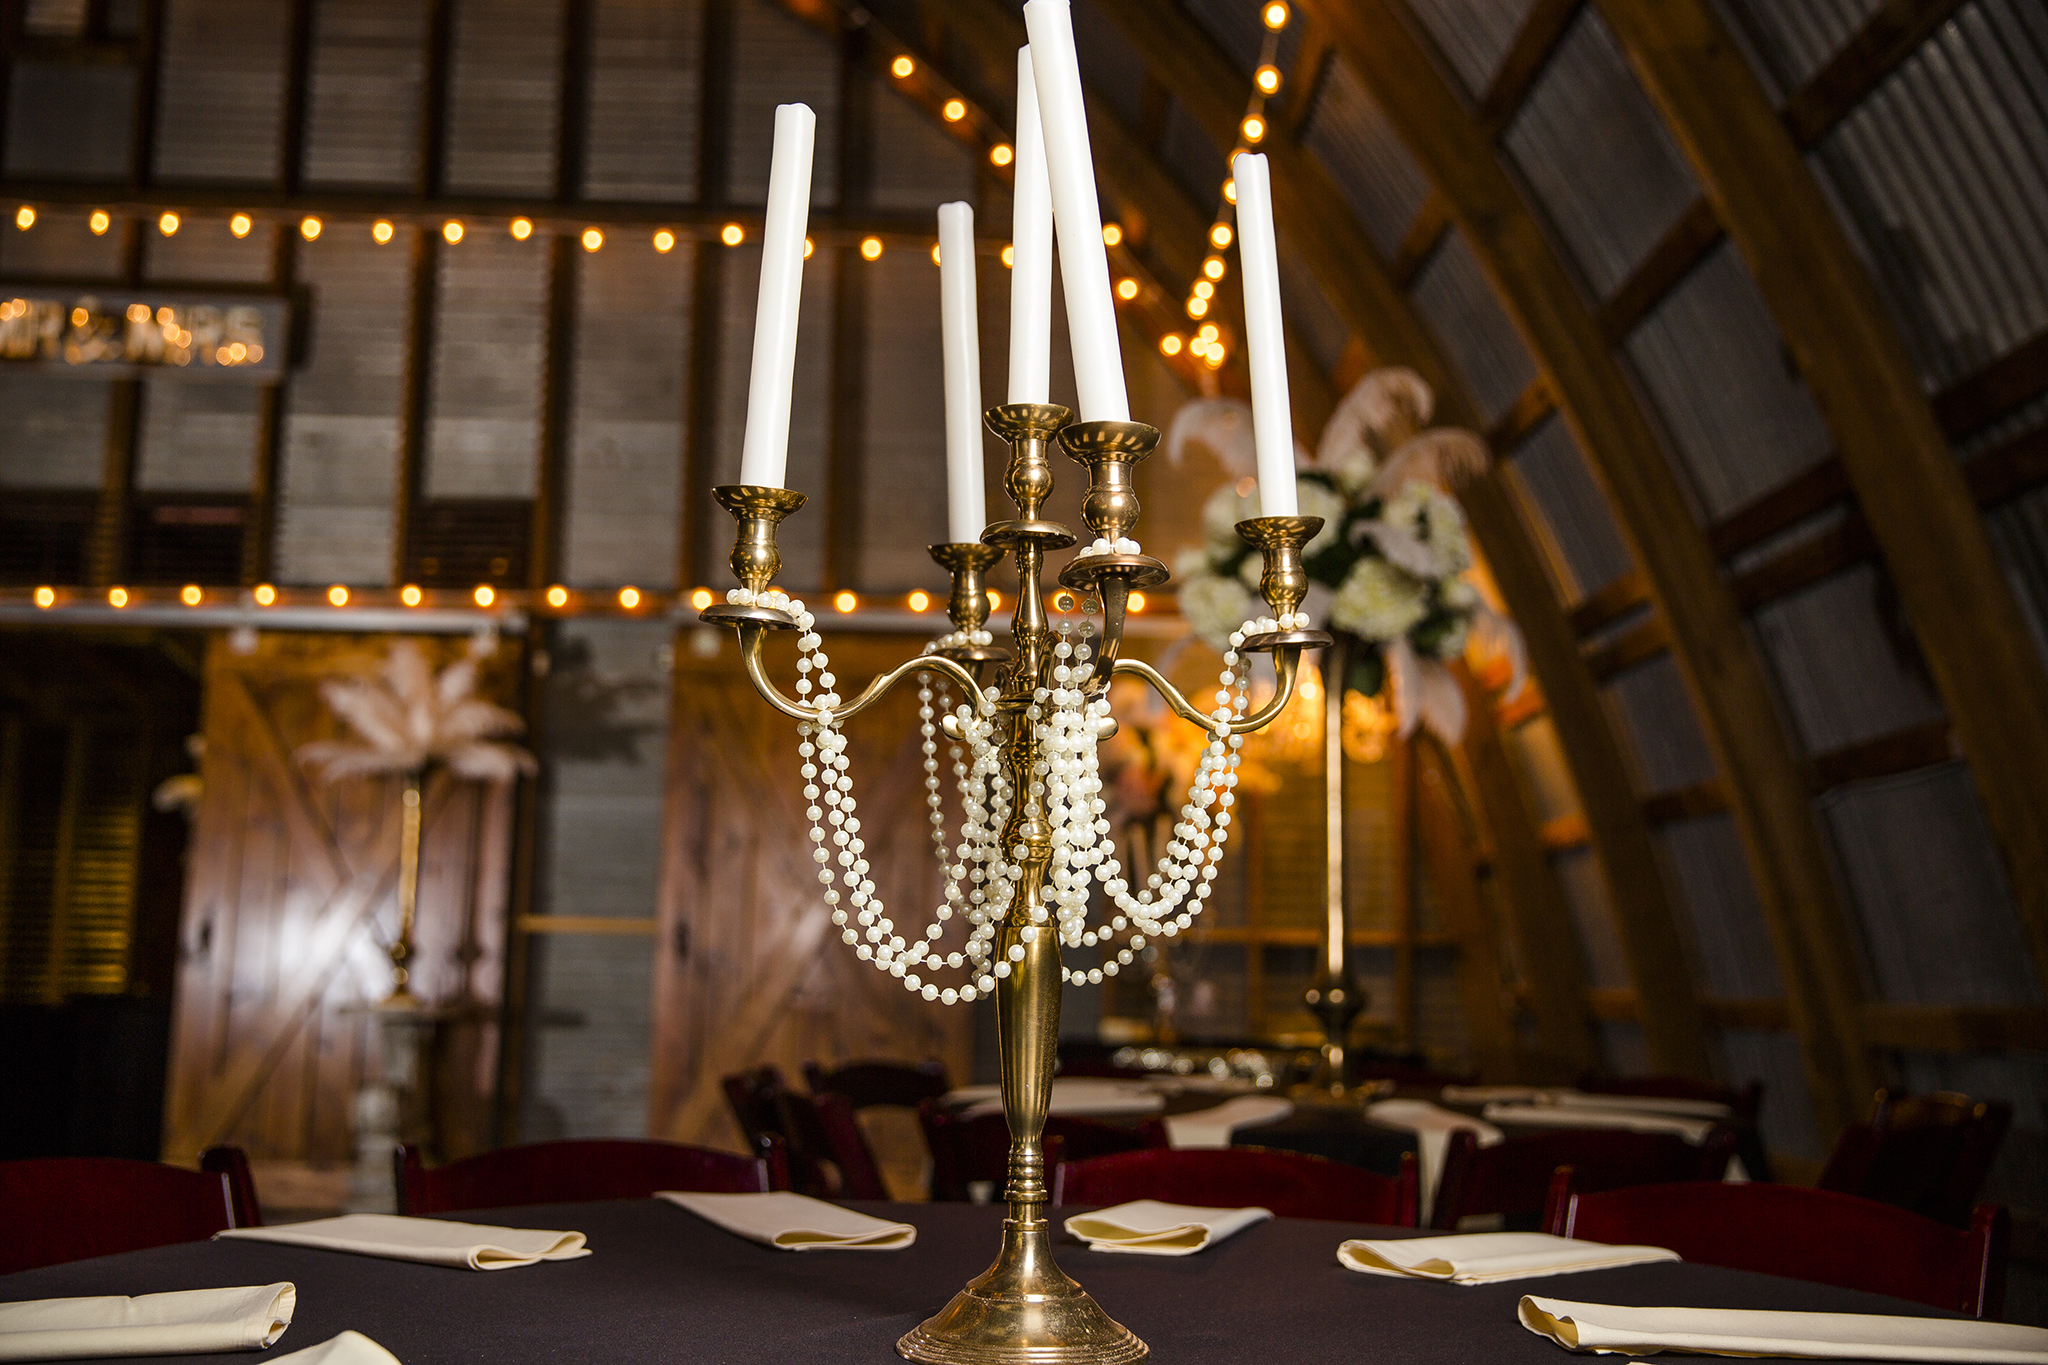 Walnut Tree Weddings, Olton, Details, Great Gatsby, Candles, Pearls, Table Setting